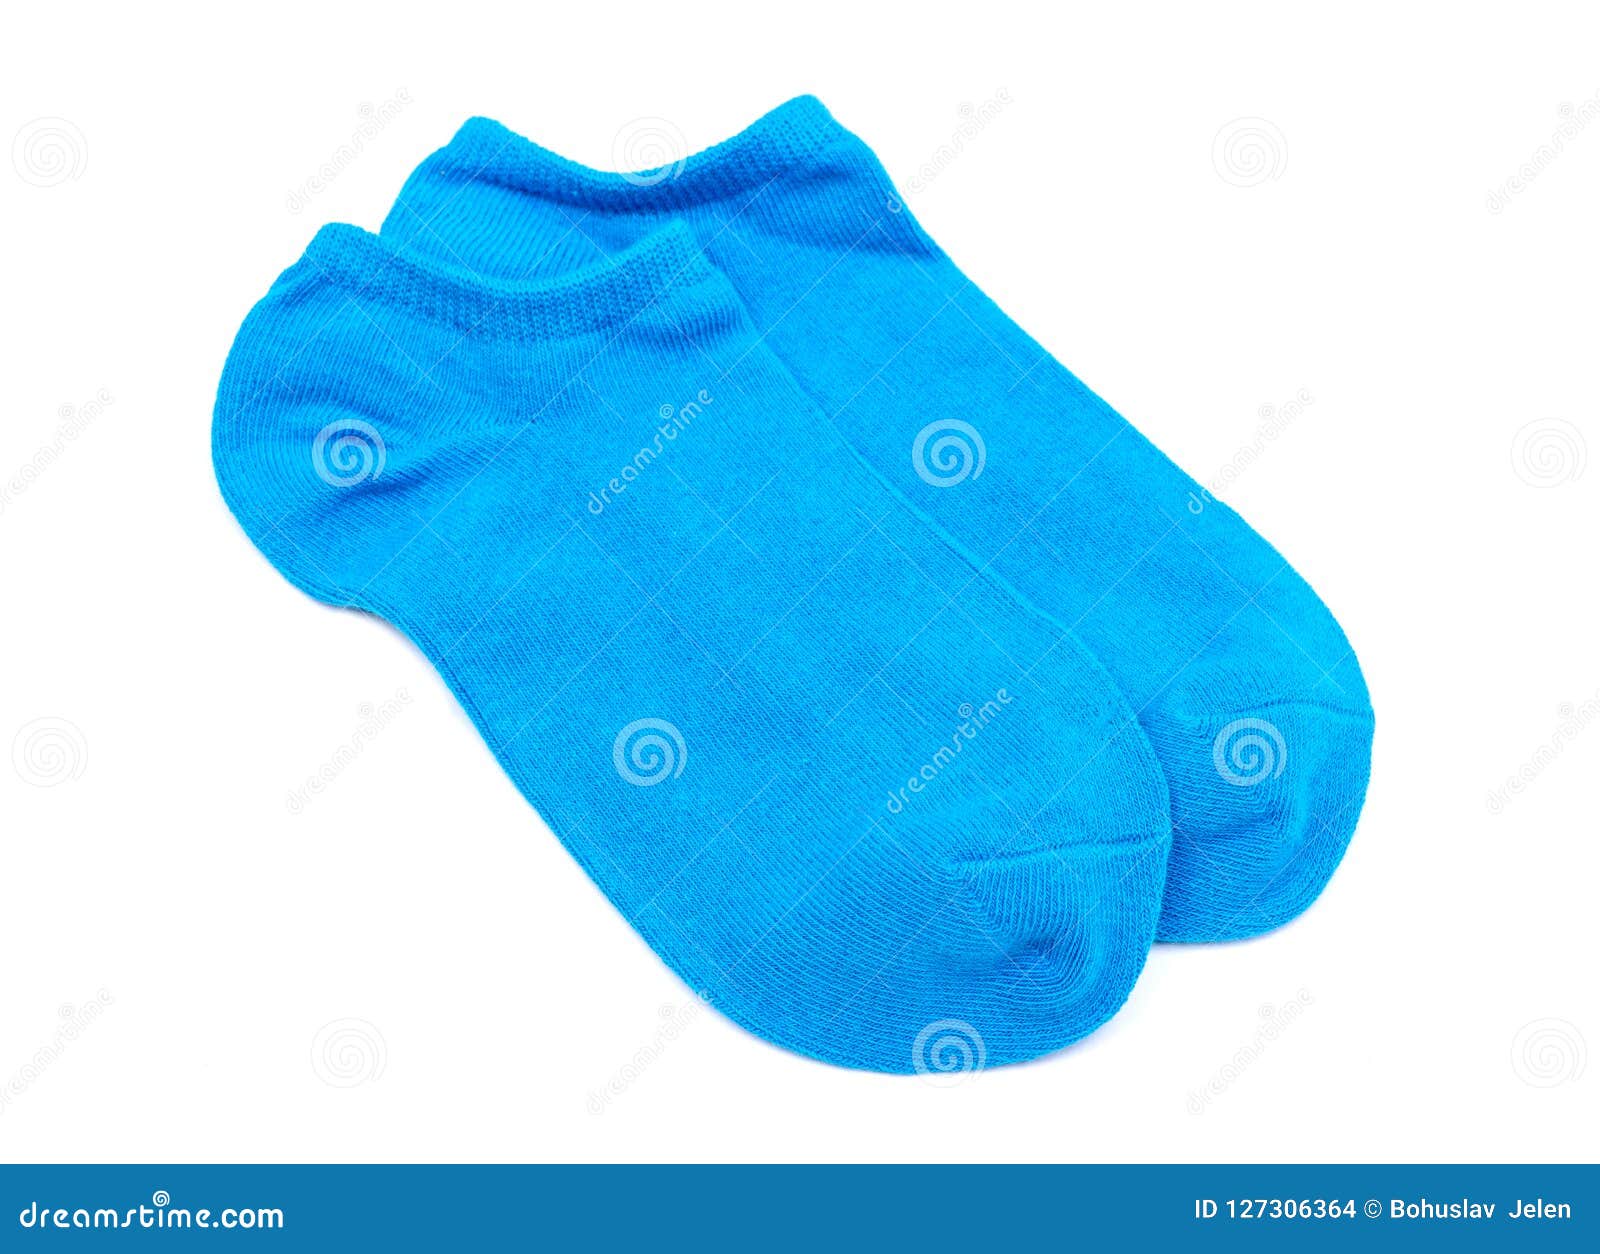 Woman`s Original Ankle Low Rise Light Blue Socks Isolated On White ...